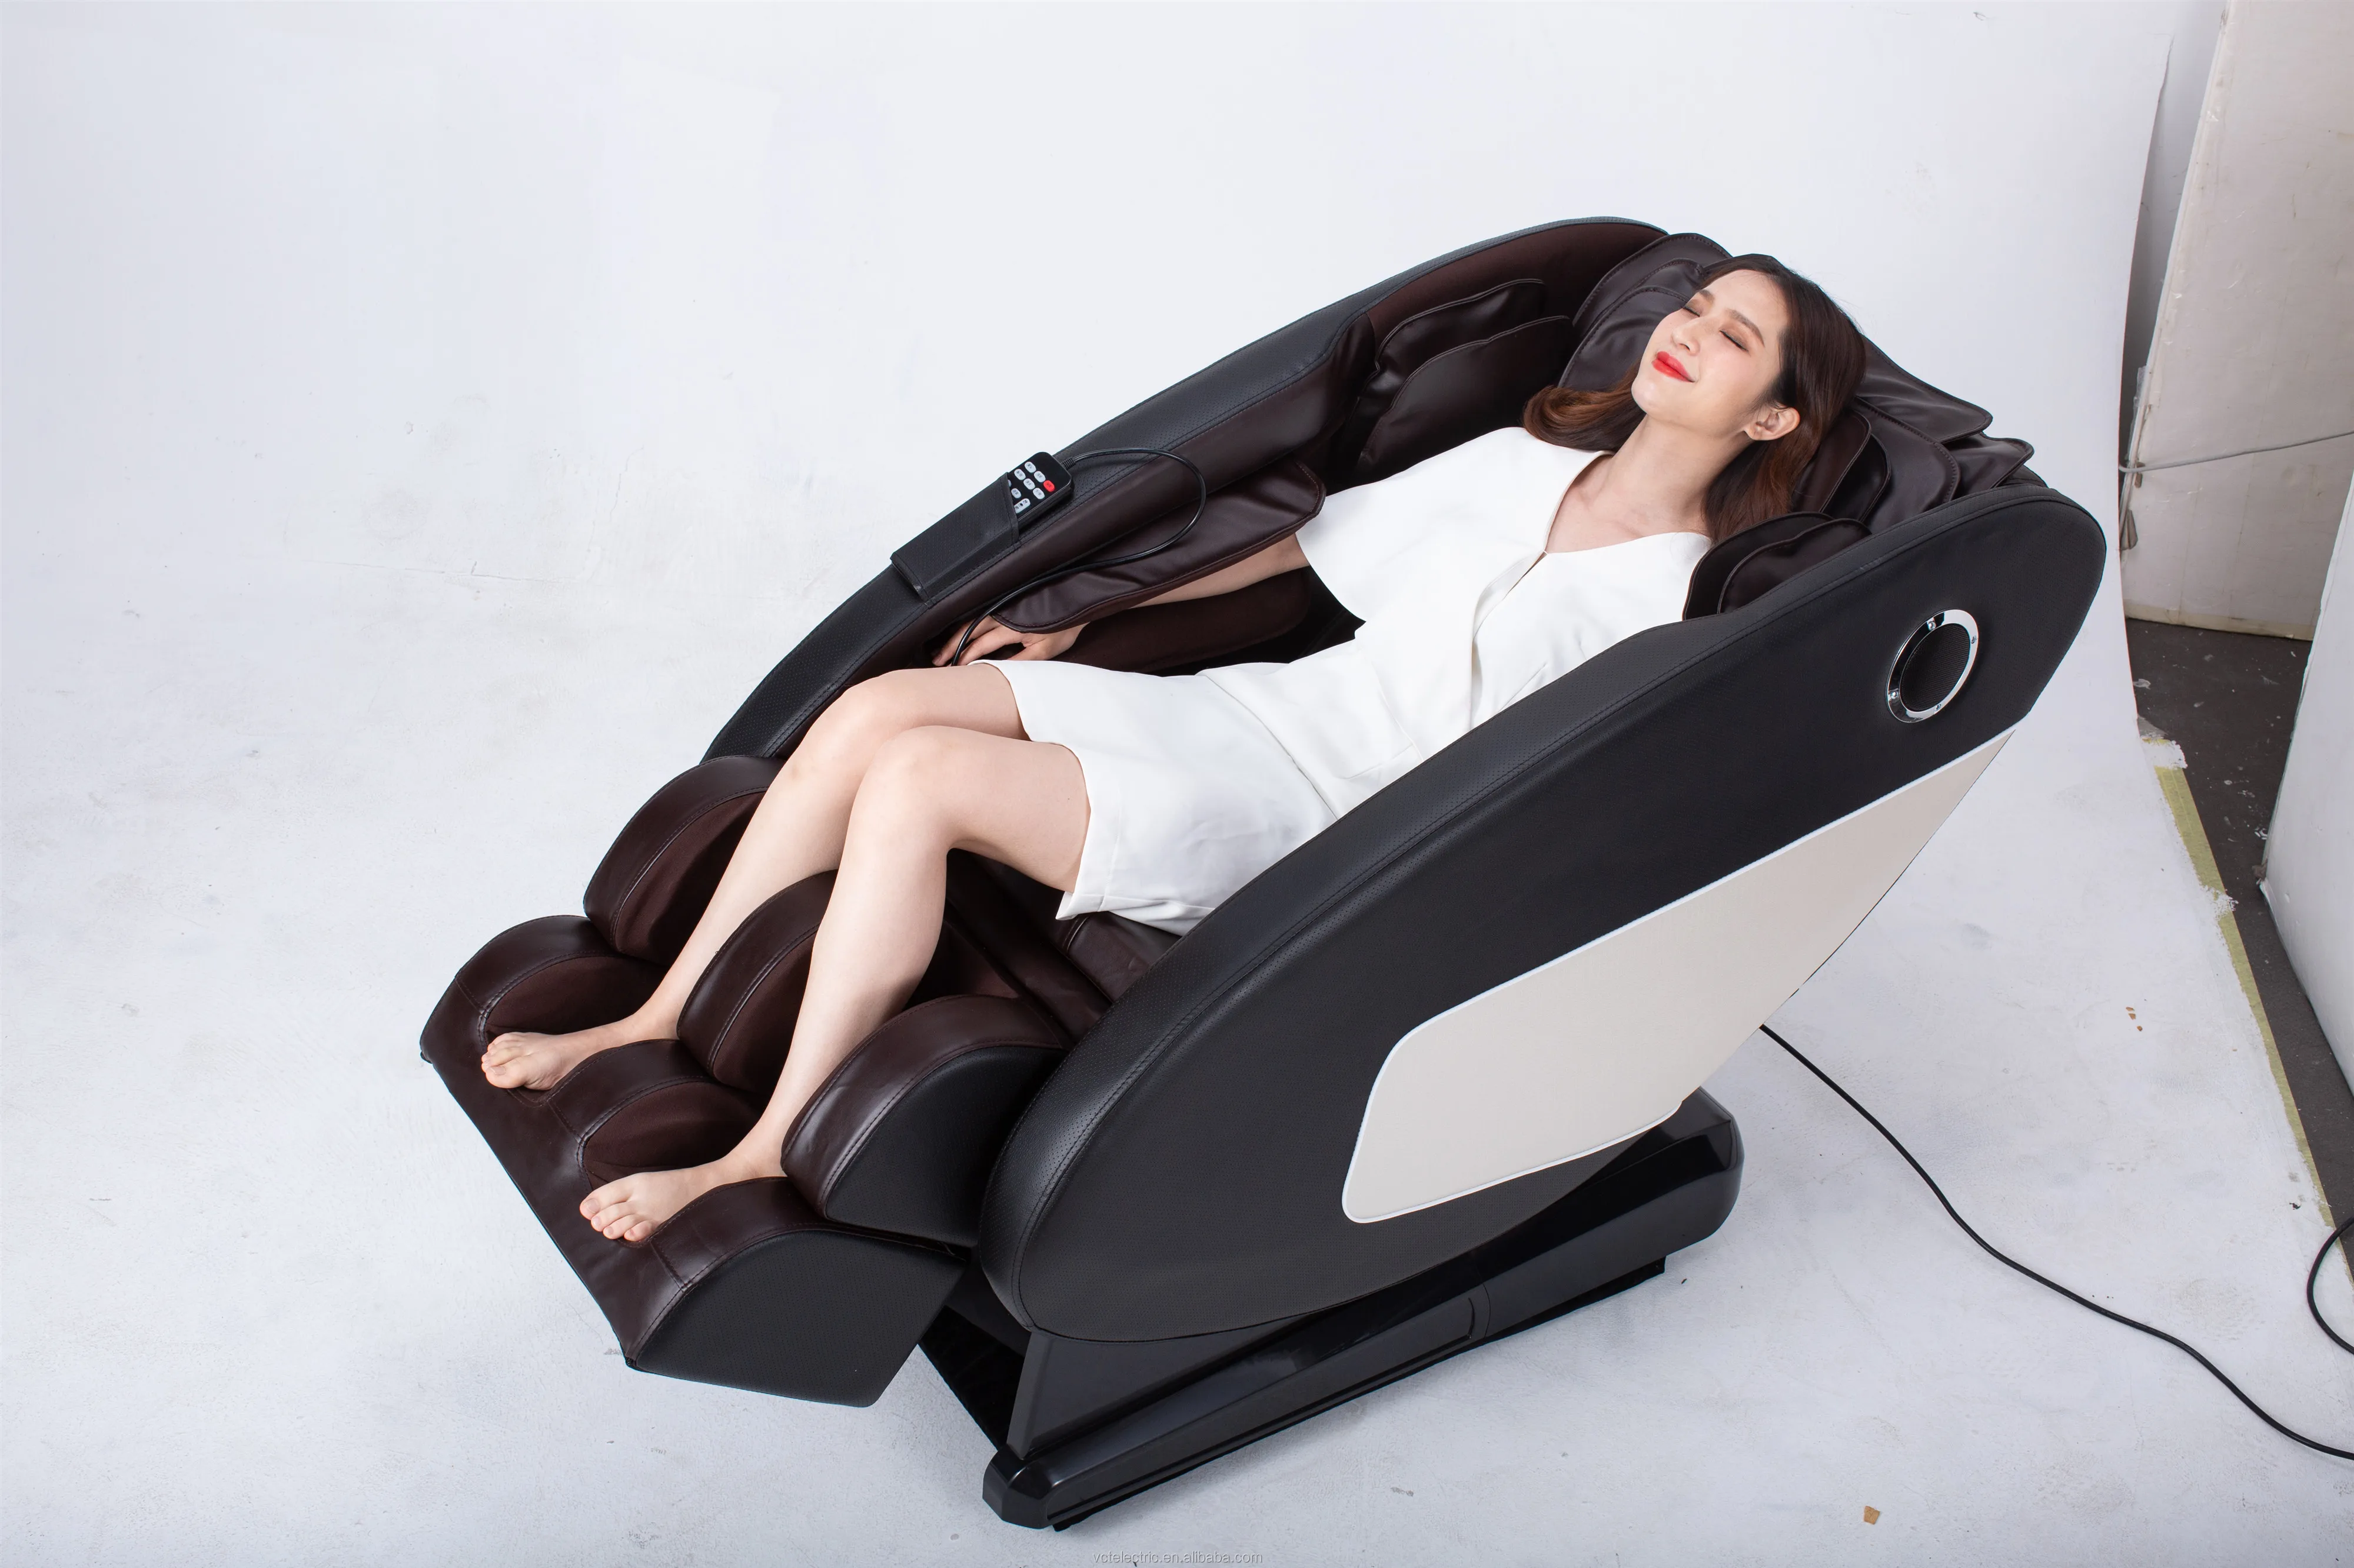 2018 Hot Sale Heating And Vibration Massage Chair Zero Gravity Massage Chair Massage Chair With